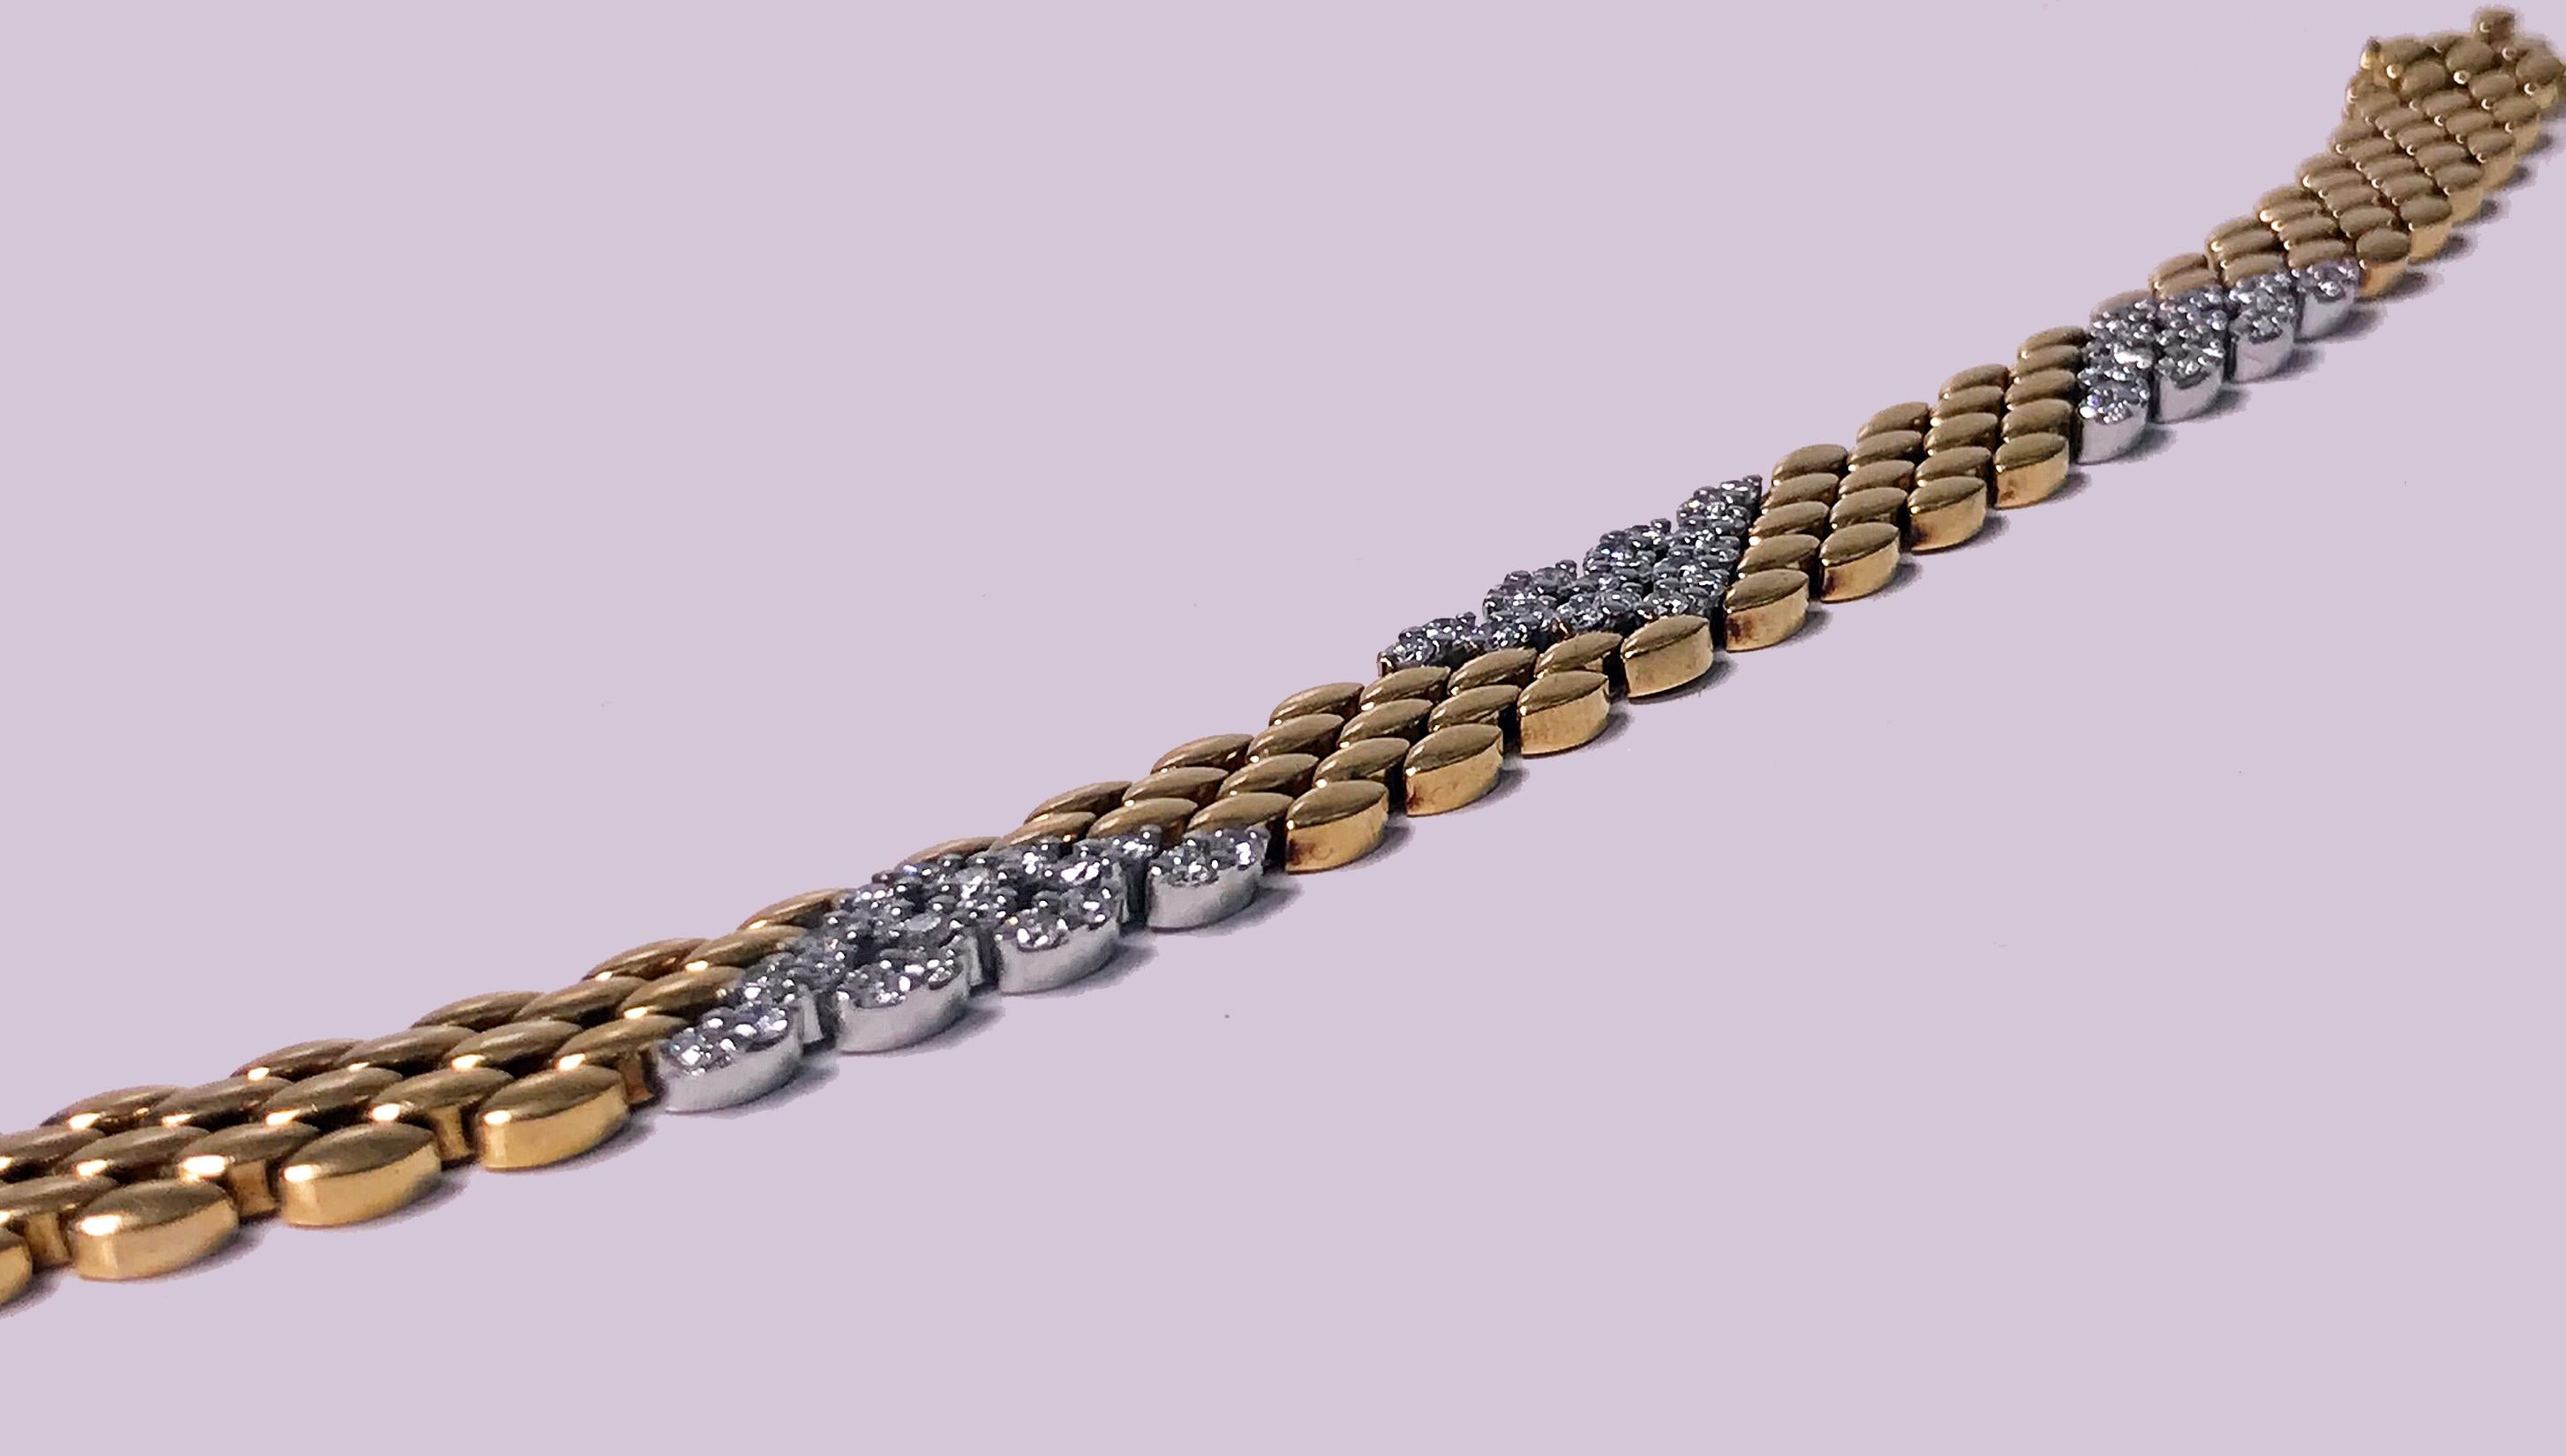 18K Diamond Bracelet, 20th century. The Bracelet of chevron and lozenge polished gold and diamond honey comb design. The three diamond sections set in white gold with a total of sixty round brilliant cut diamonds, approximately 1.80 ct, total